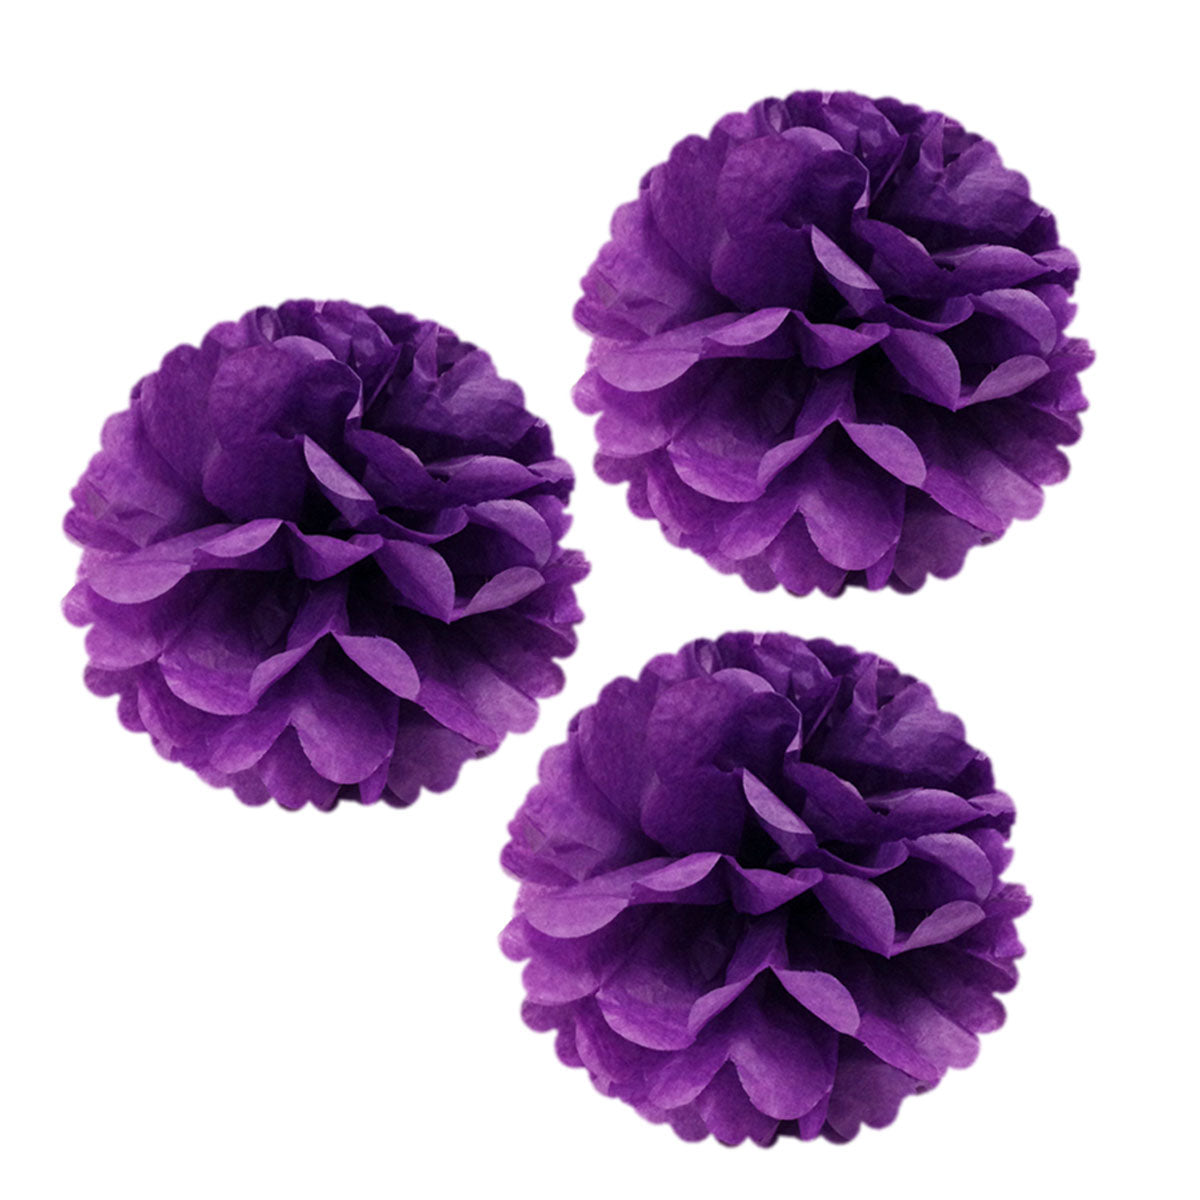 Wrapables 12 inch Set of 3 Tissue Pom Poms Party Decorations for Weddings, Birthday Parties Baby Showers and Nursery Dcor, Purple